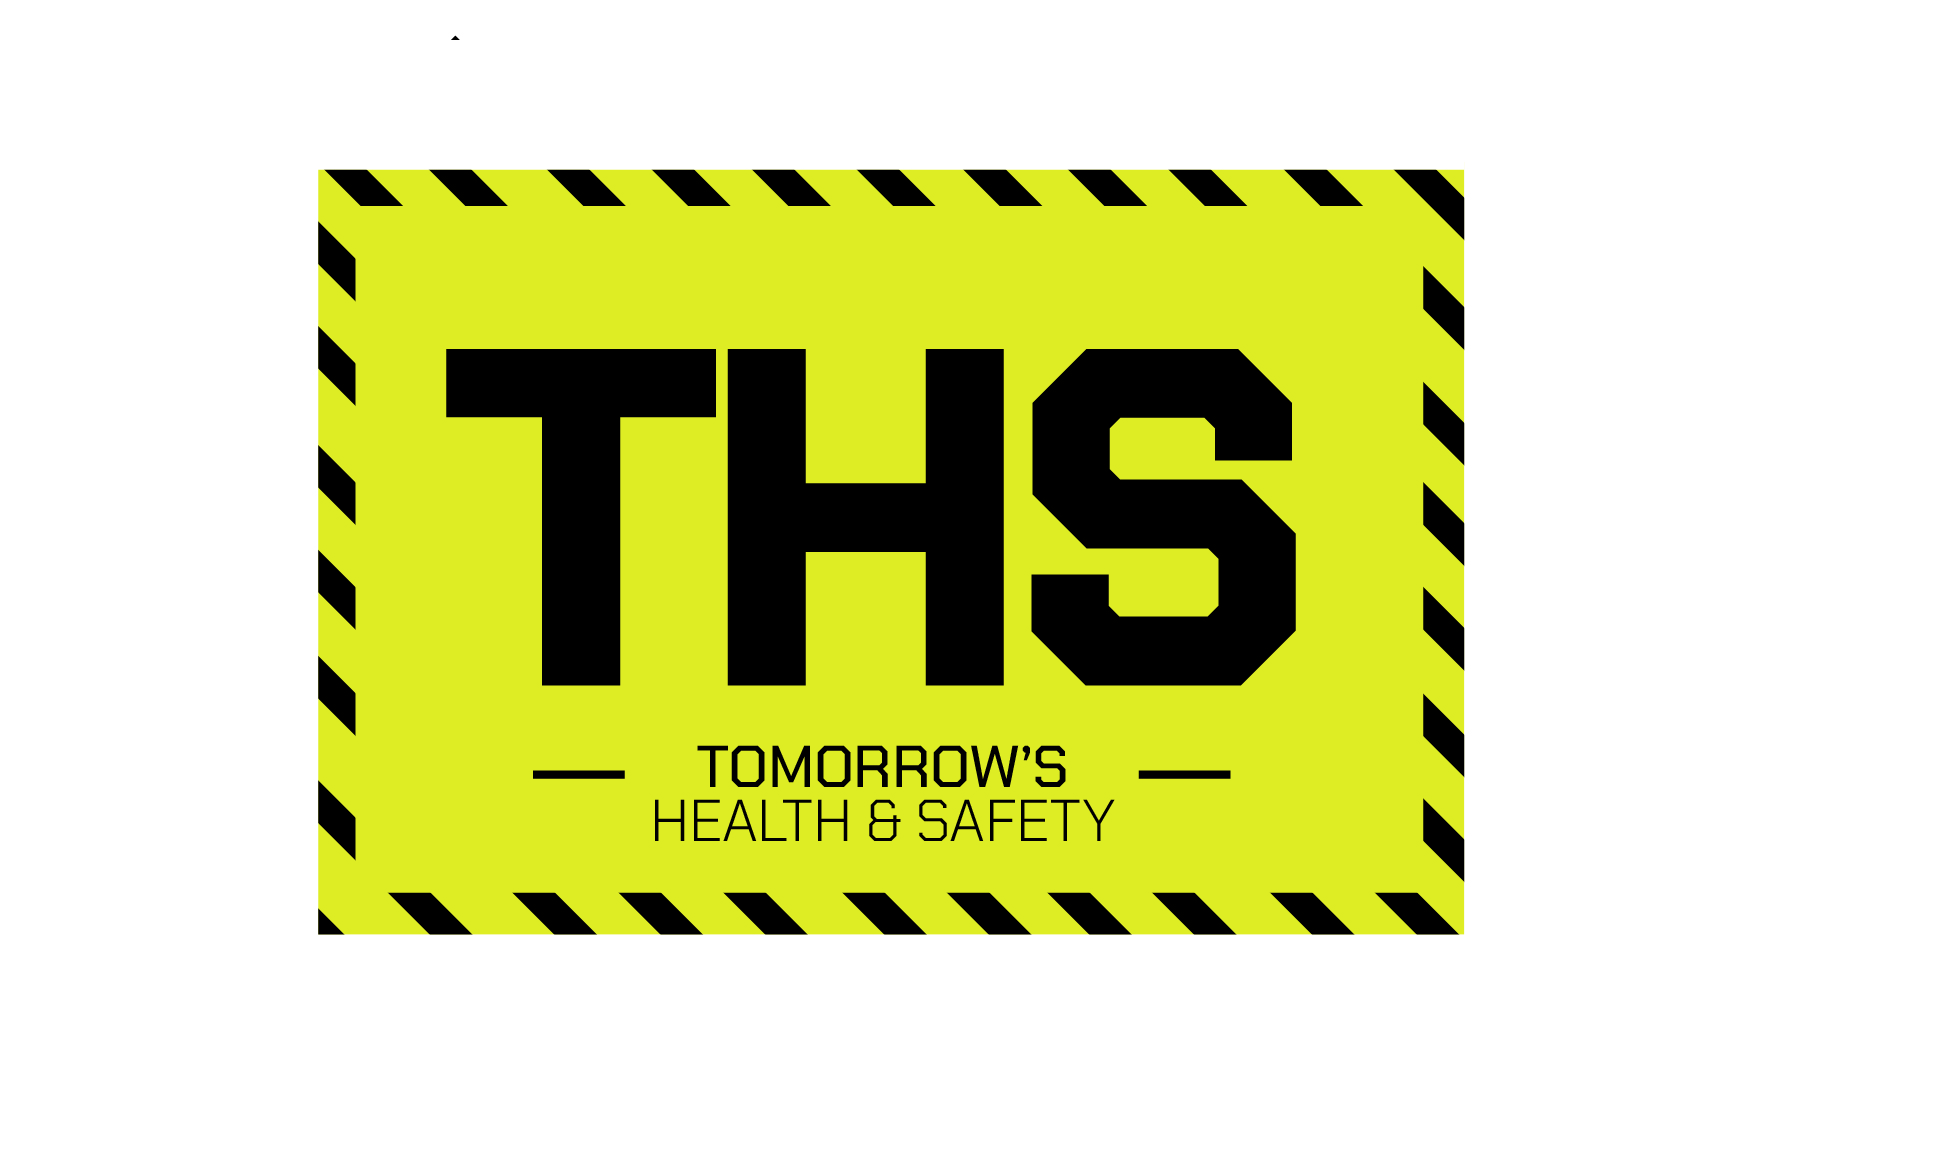 What is Tomorrow's Health & Safety?